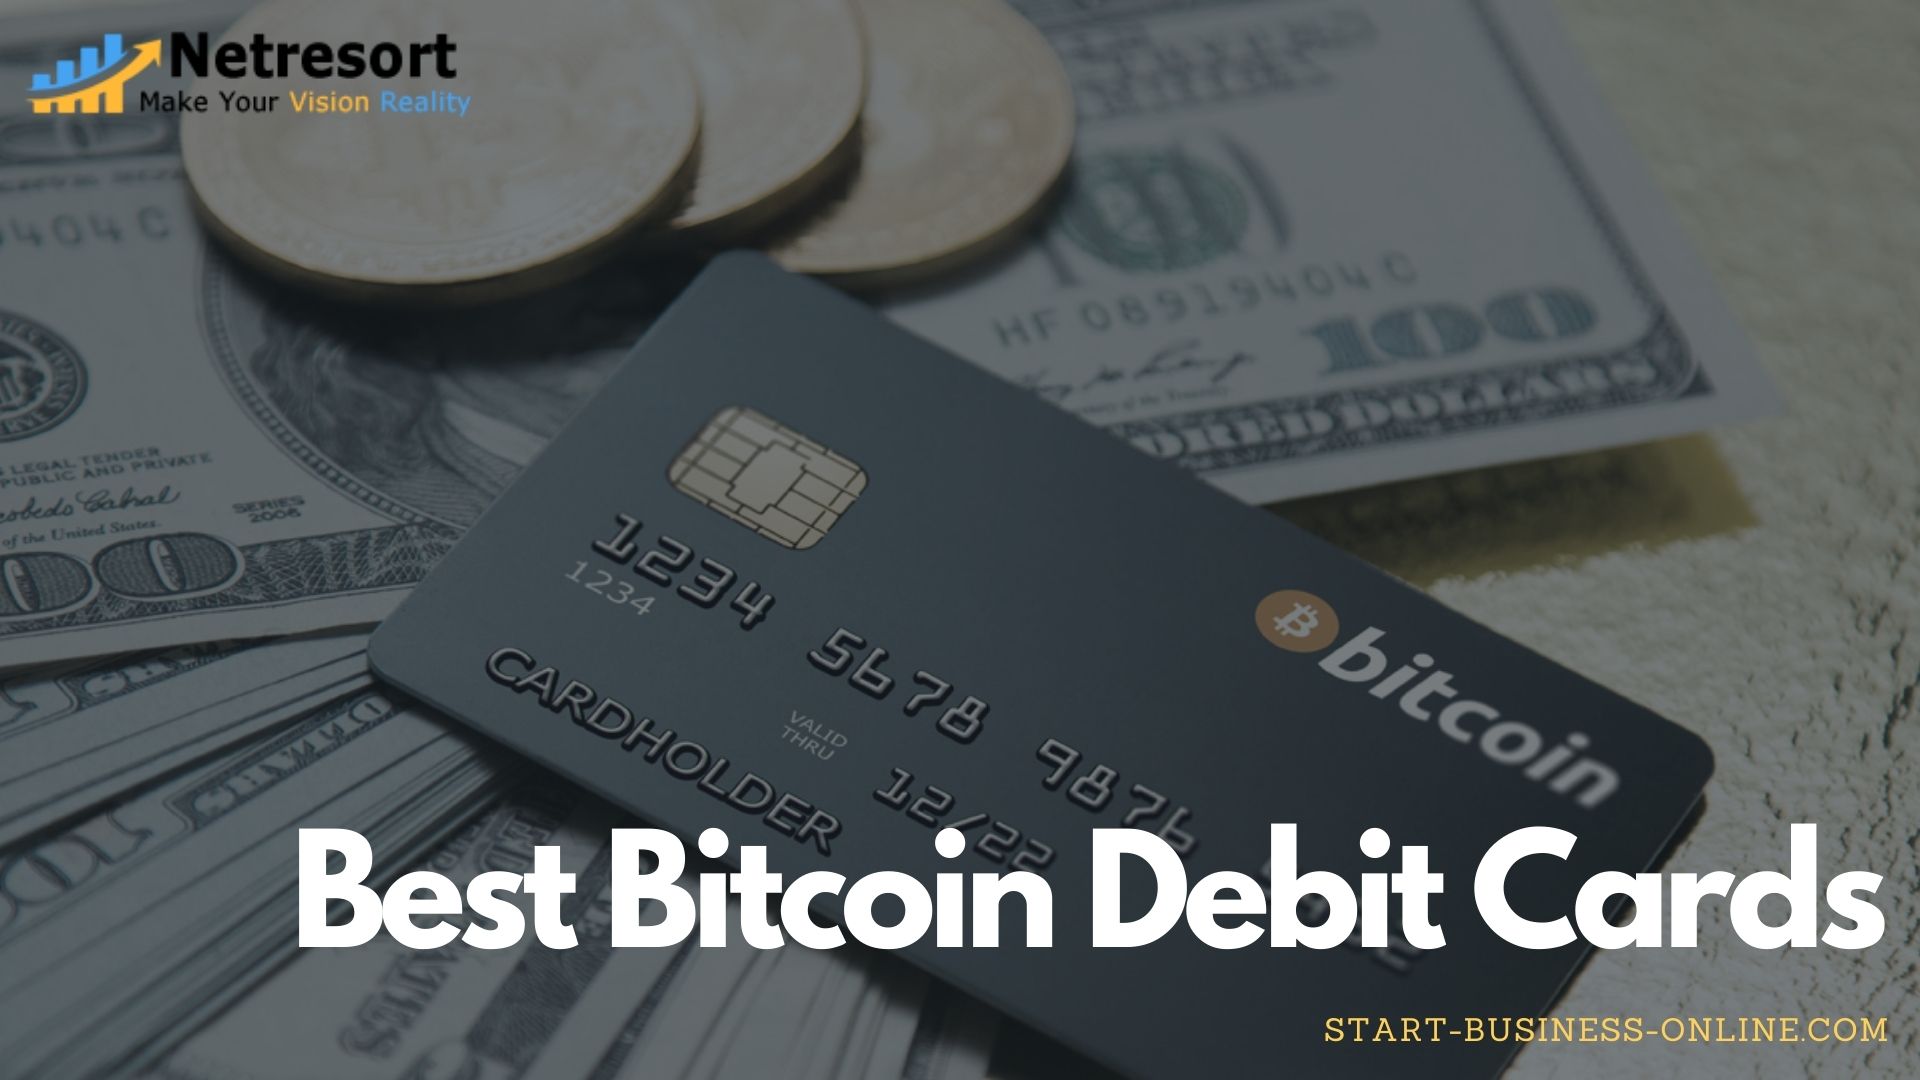 What Is The Best Crypto Debit Card Out There? : How To Choose The Best Bitcoin Debit Card In Australia - While the final choice of bitcoin debit card depends on the individual and their particular set of circumstances, there are a number of factors that should be taken into consideration when choosing a card and/or service provider and.